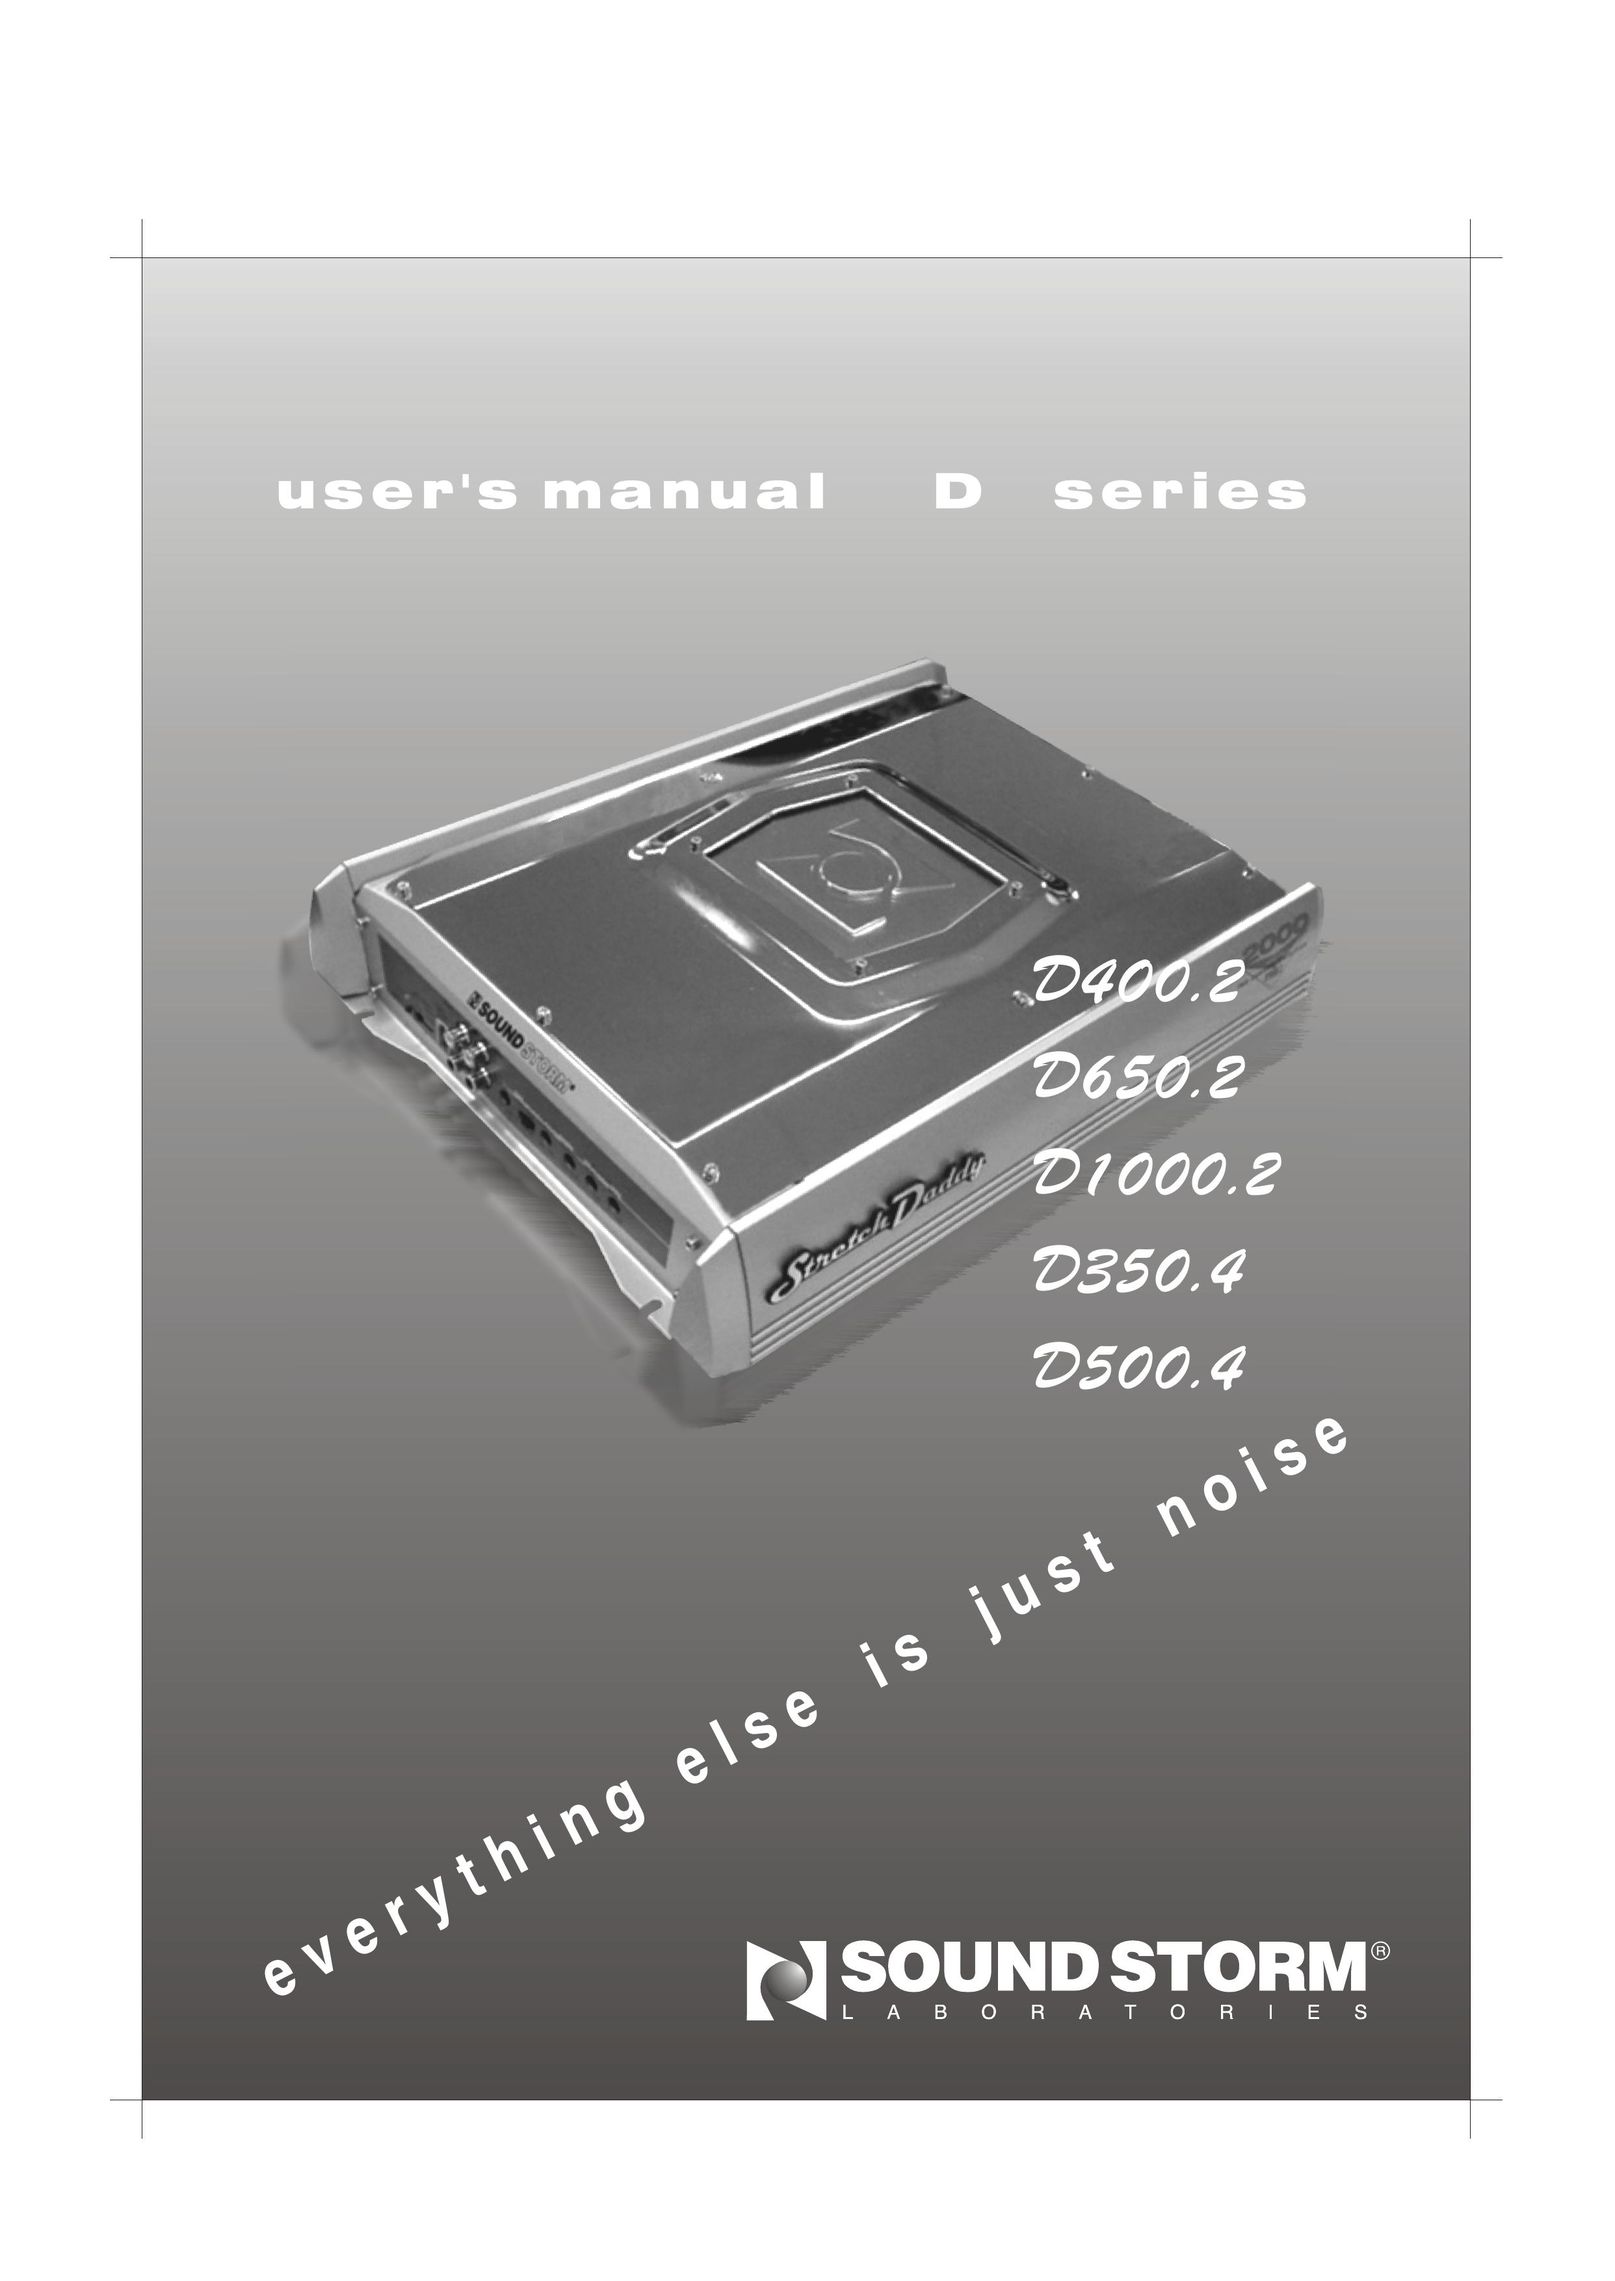 Sound Storm Laboratories D650.2 Stereo Amplifier User Manual